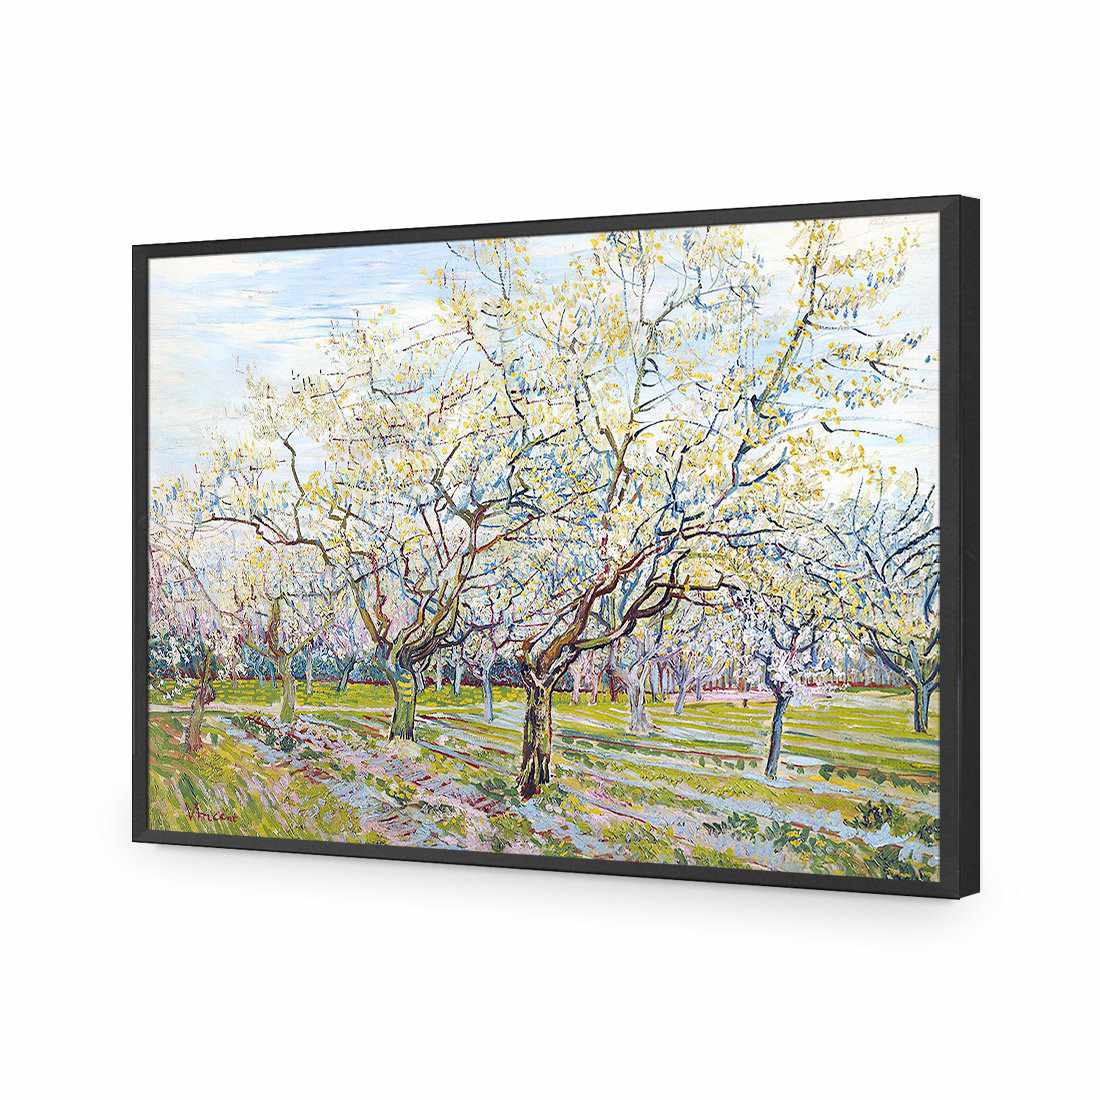 The White Orchard - Van Gogh-Acrylic-Wall Art Design-Without Border-Acrylic - Black Frame-45x30cm-Wall Art Designs